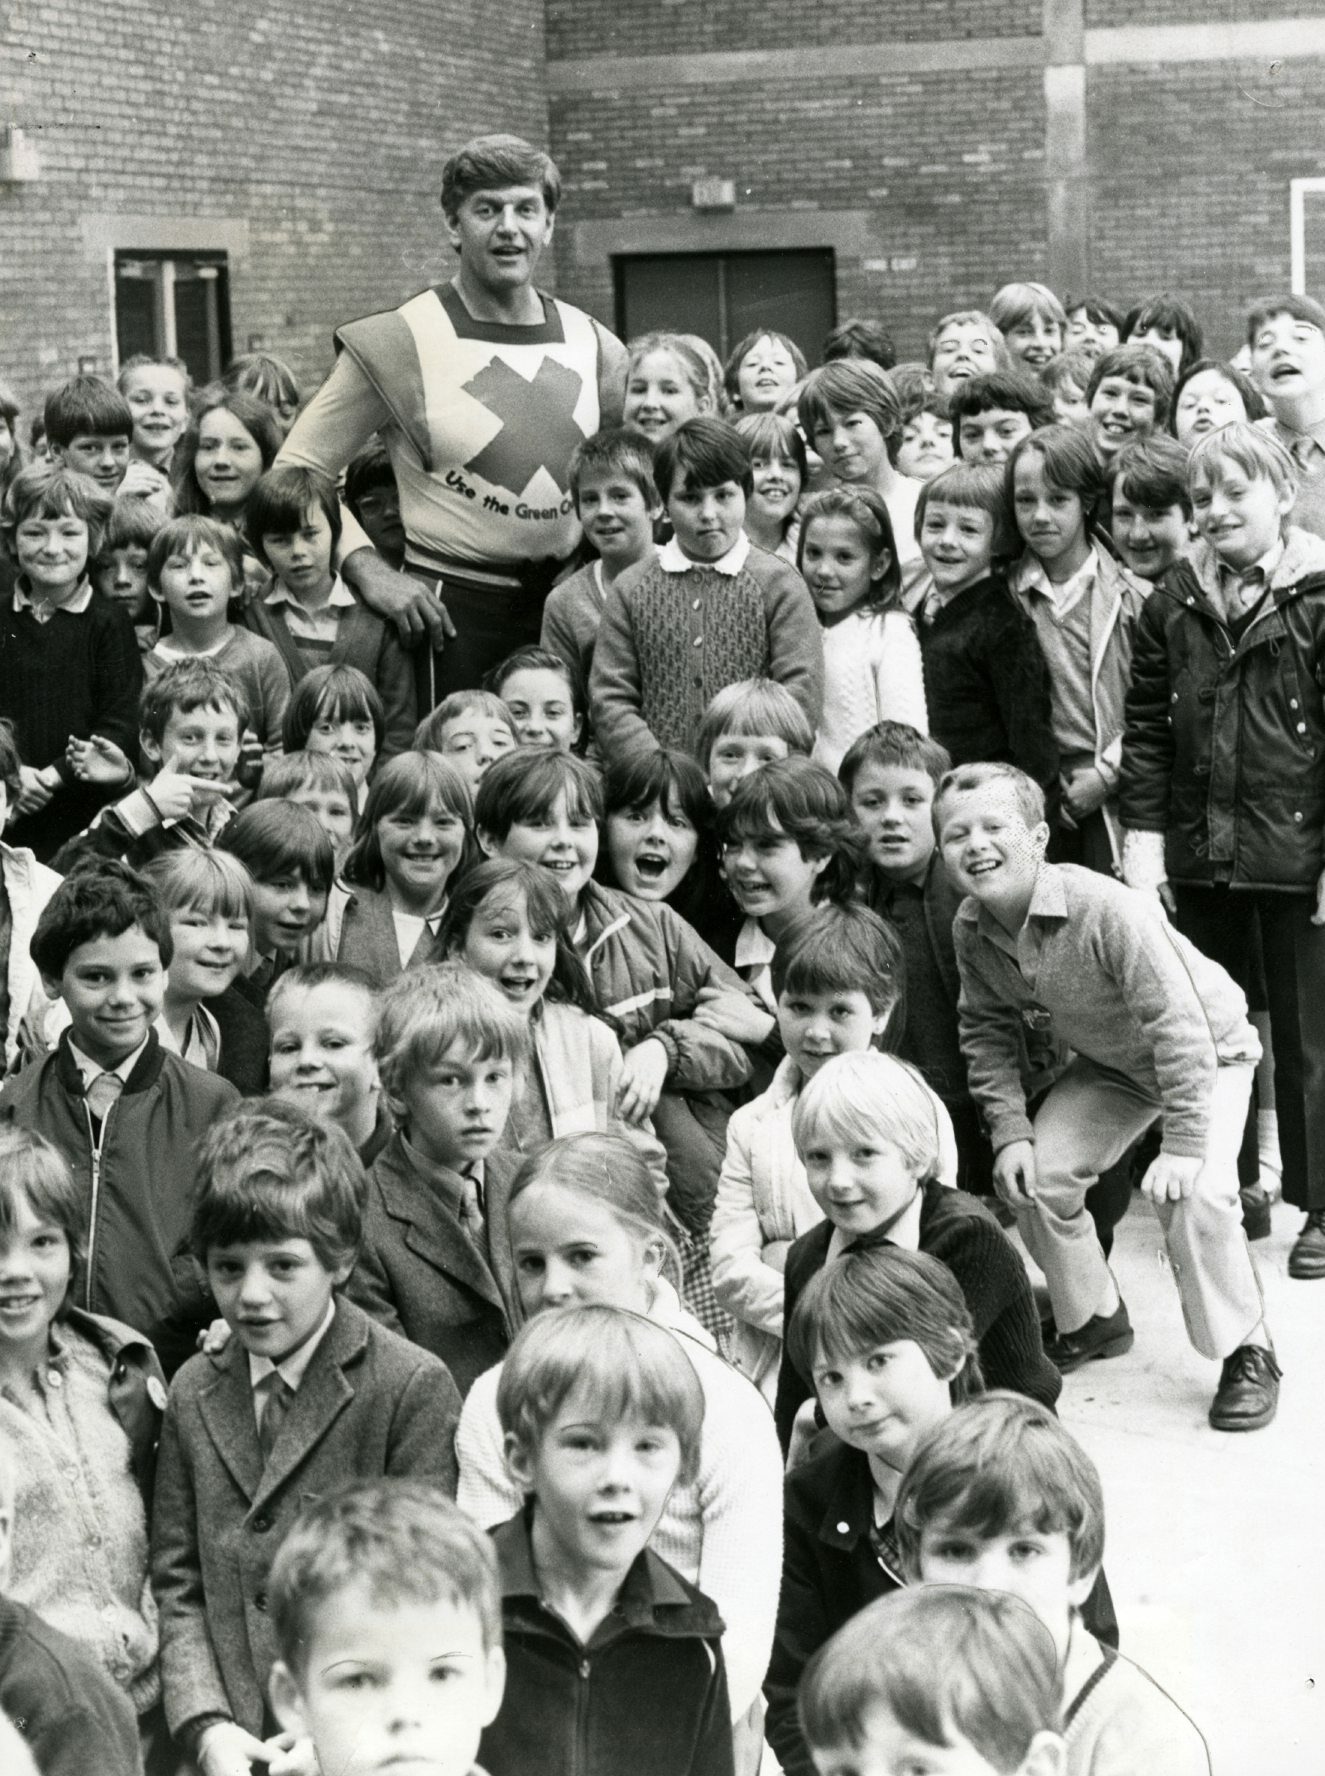 Darth Vader David Prowse speaking to primary school pupils as the Green Cross Code Man in Dundee back in June 1982. Image: DC Thomson.